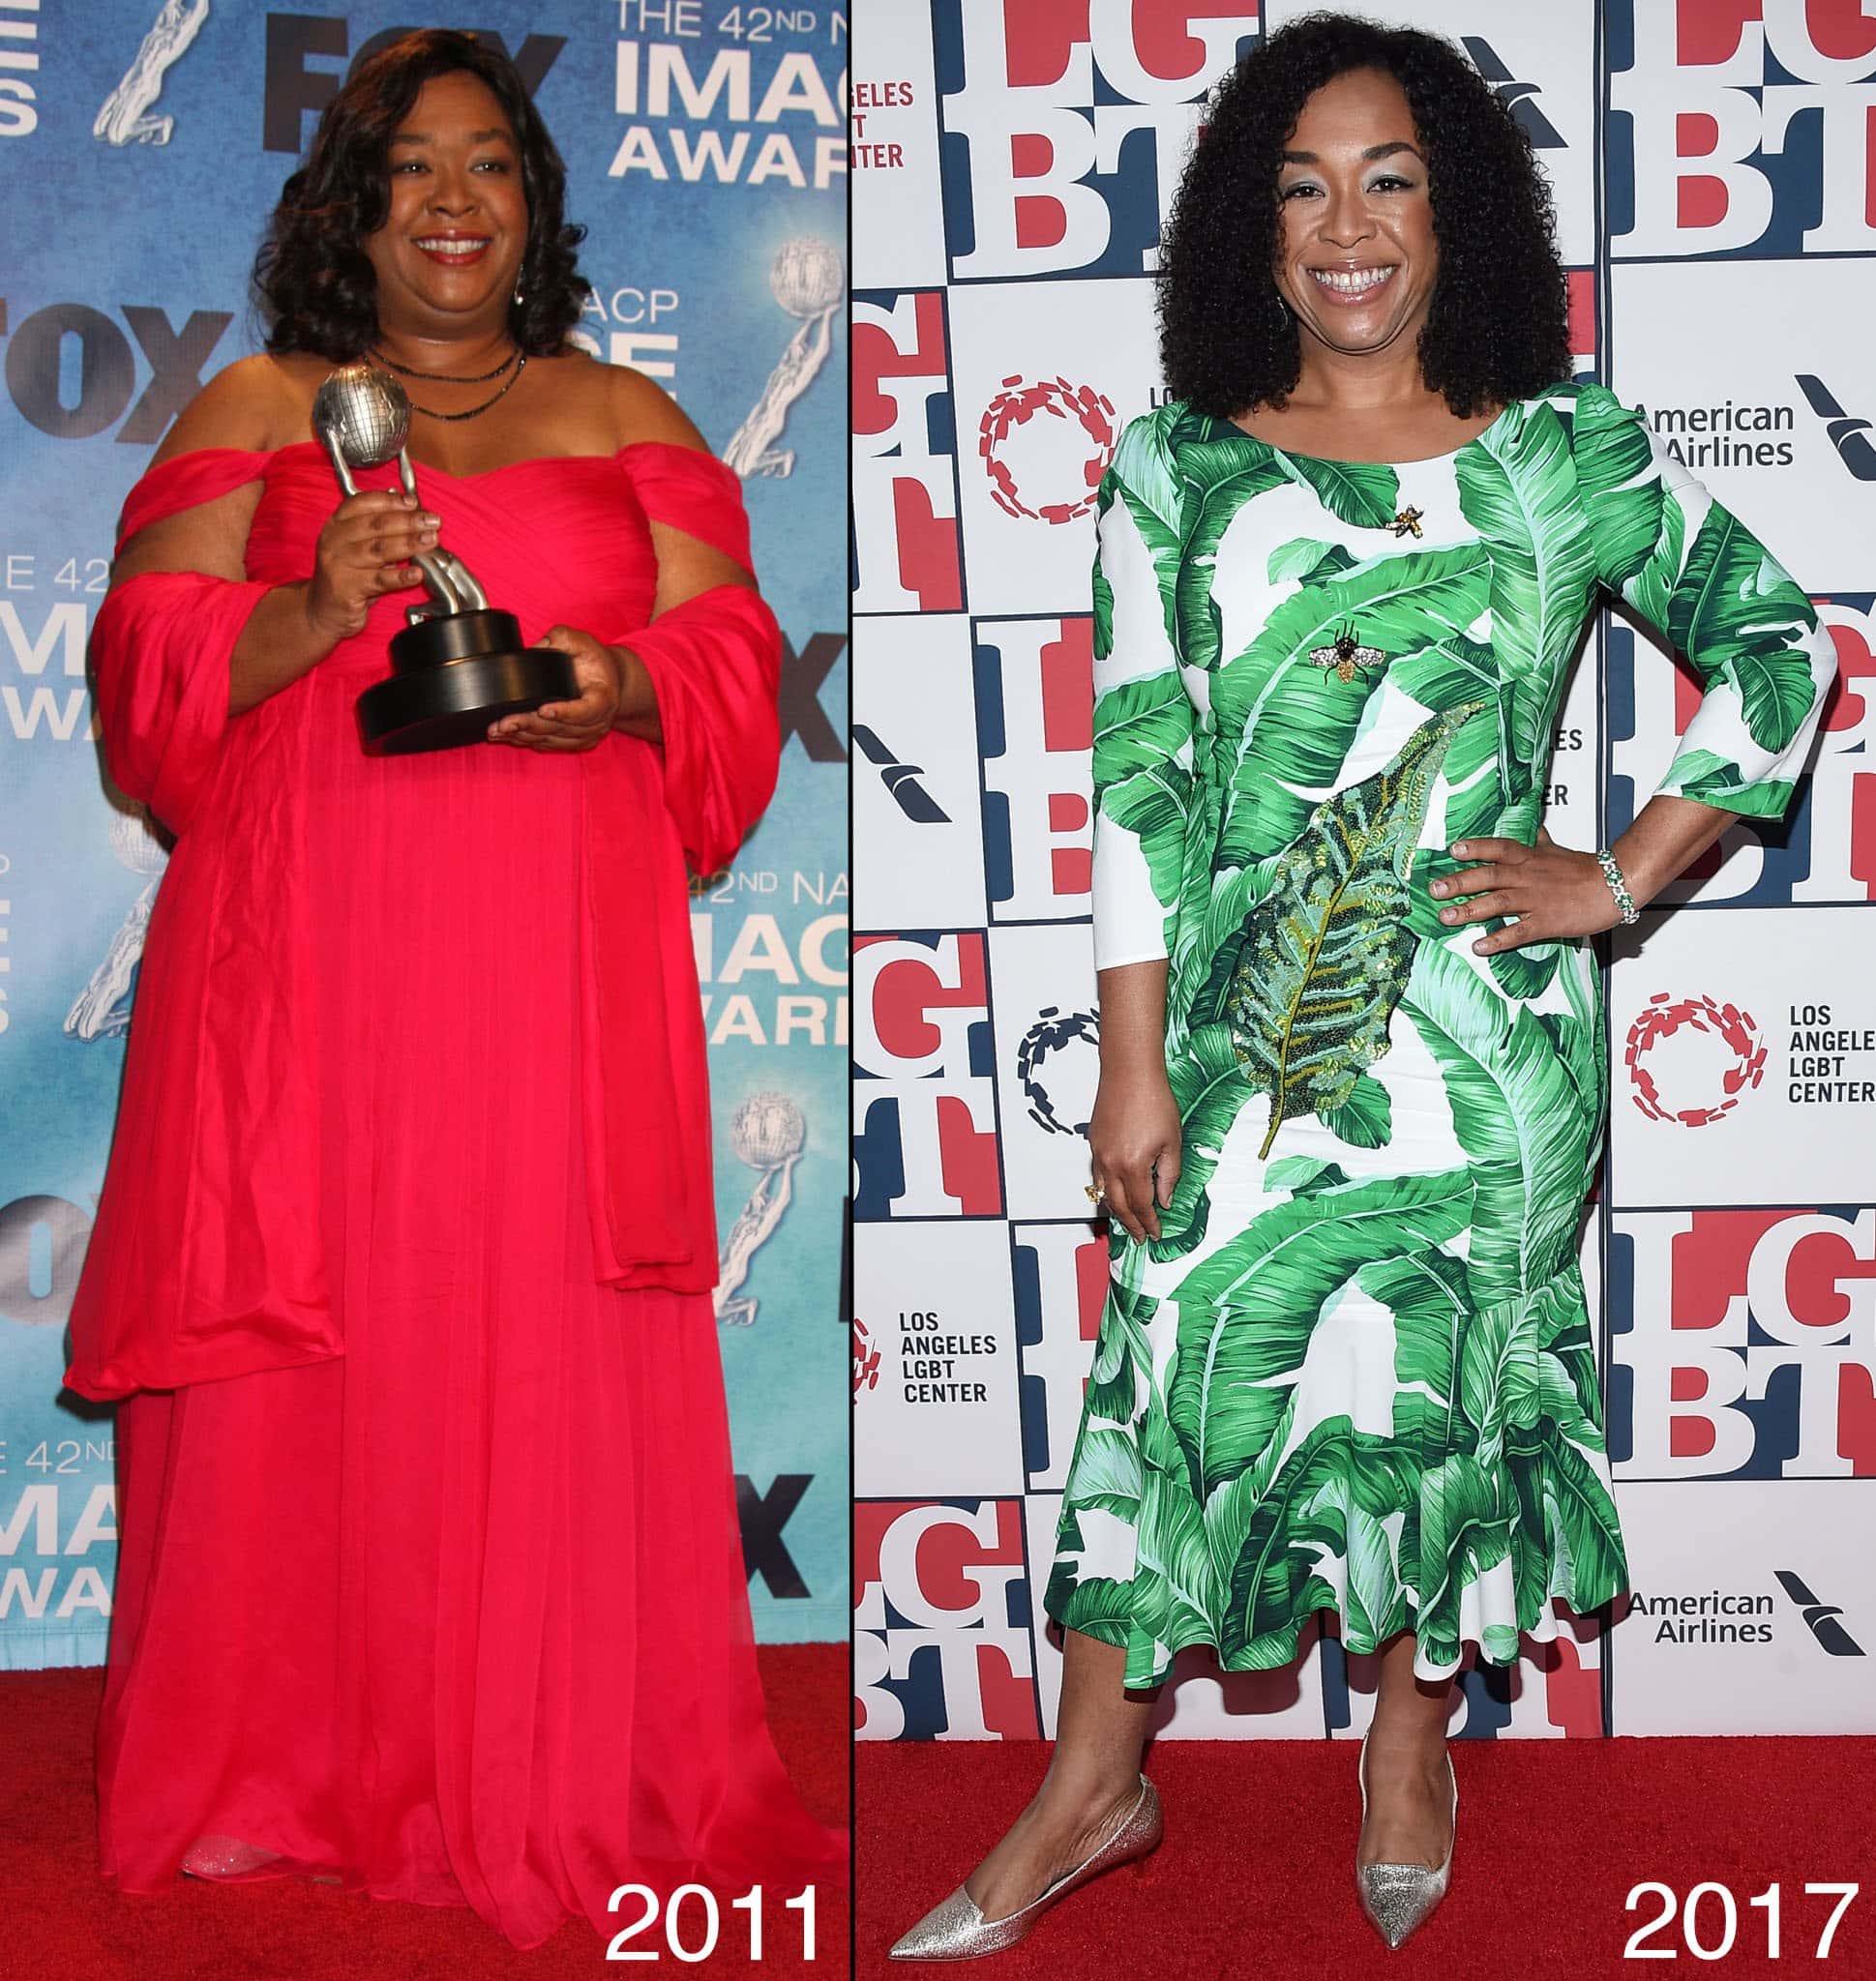 Shonda Rimes dropped 150 pounds by making healthy lifestyle changes and adopting a keto diet